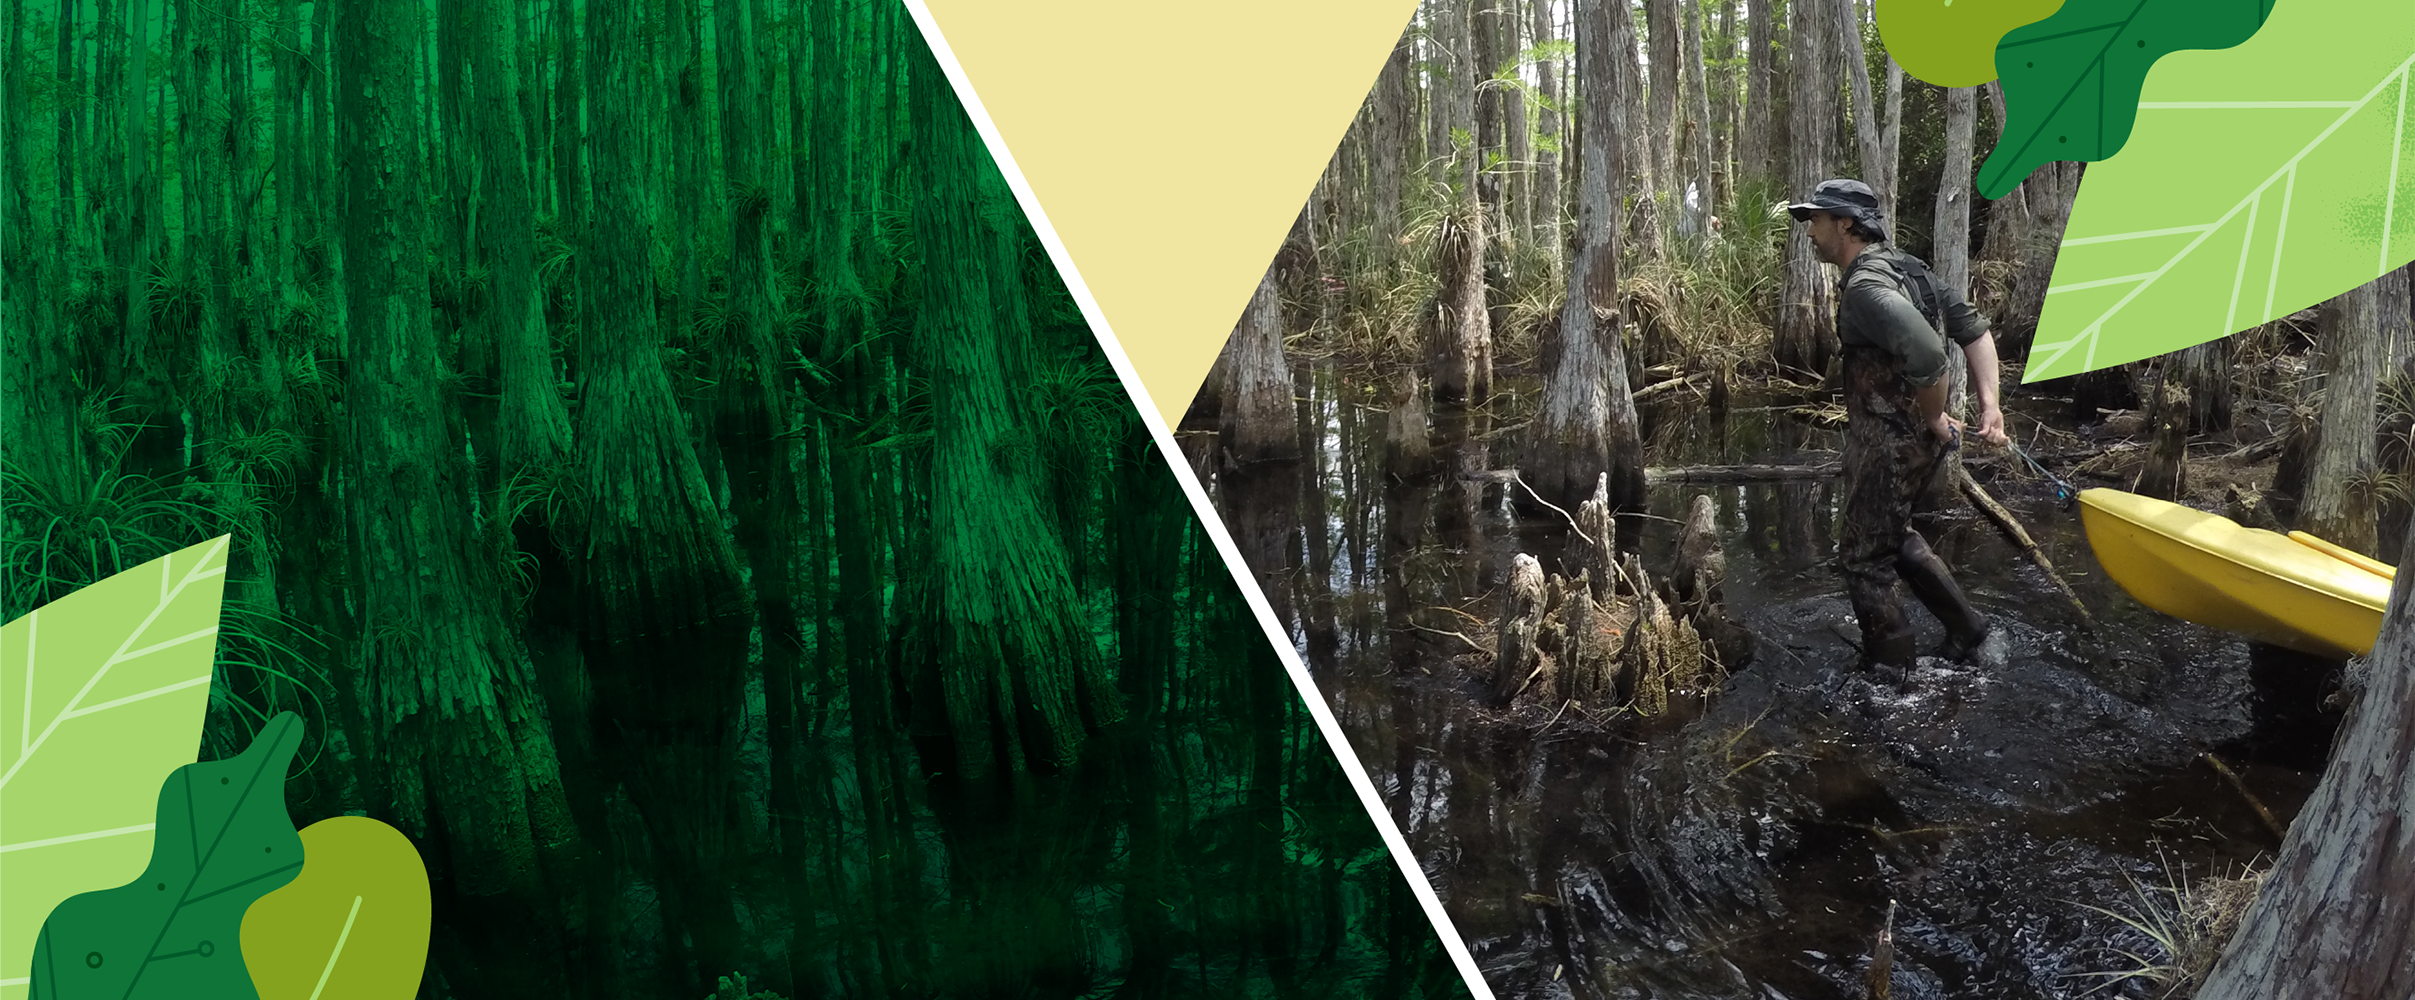 Xavier Comas, Ph.D., in the cypress strand at the Big Cypress National Preserve